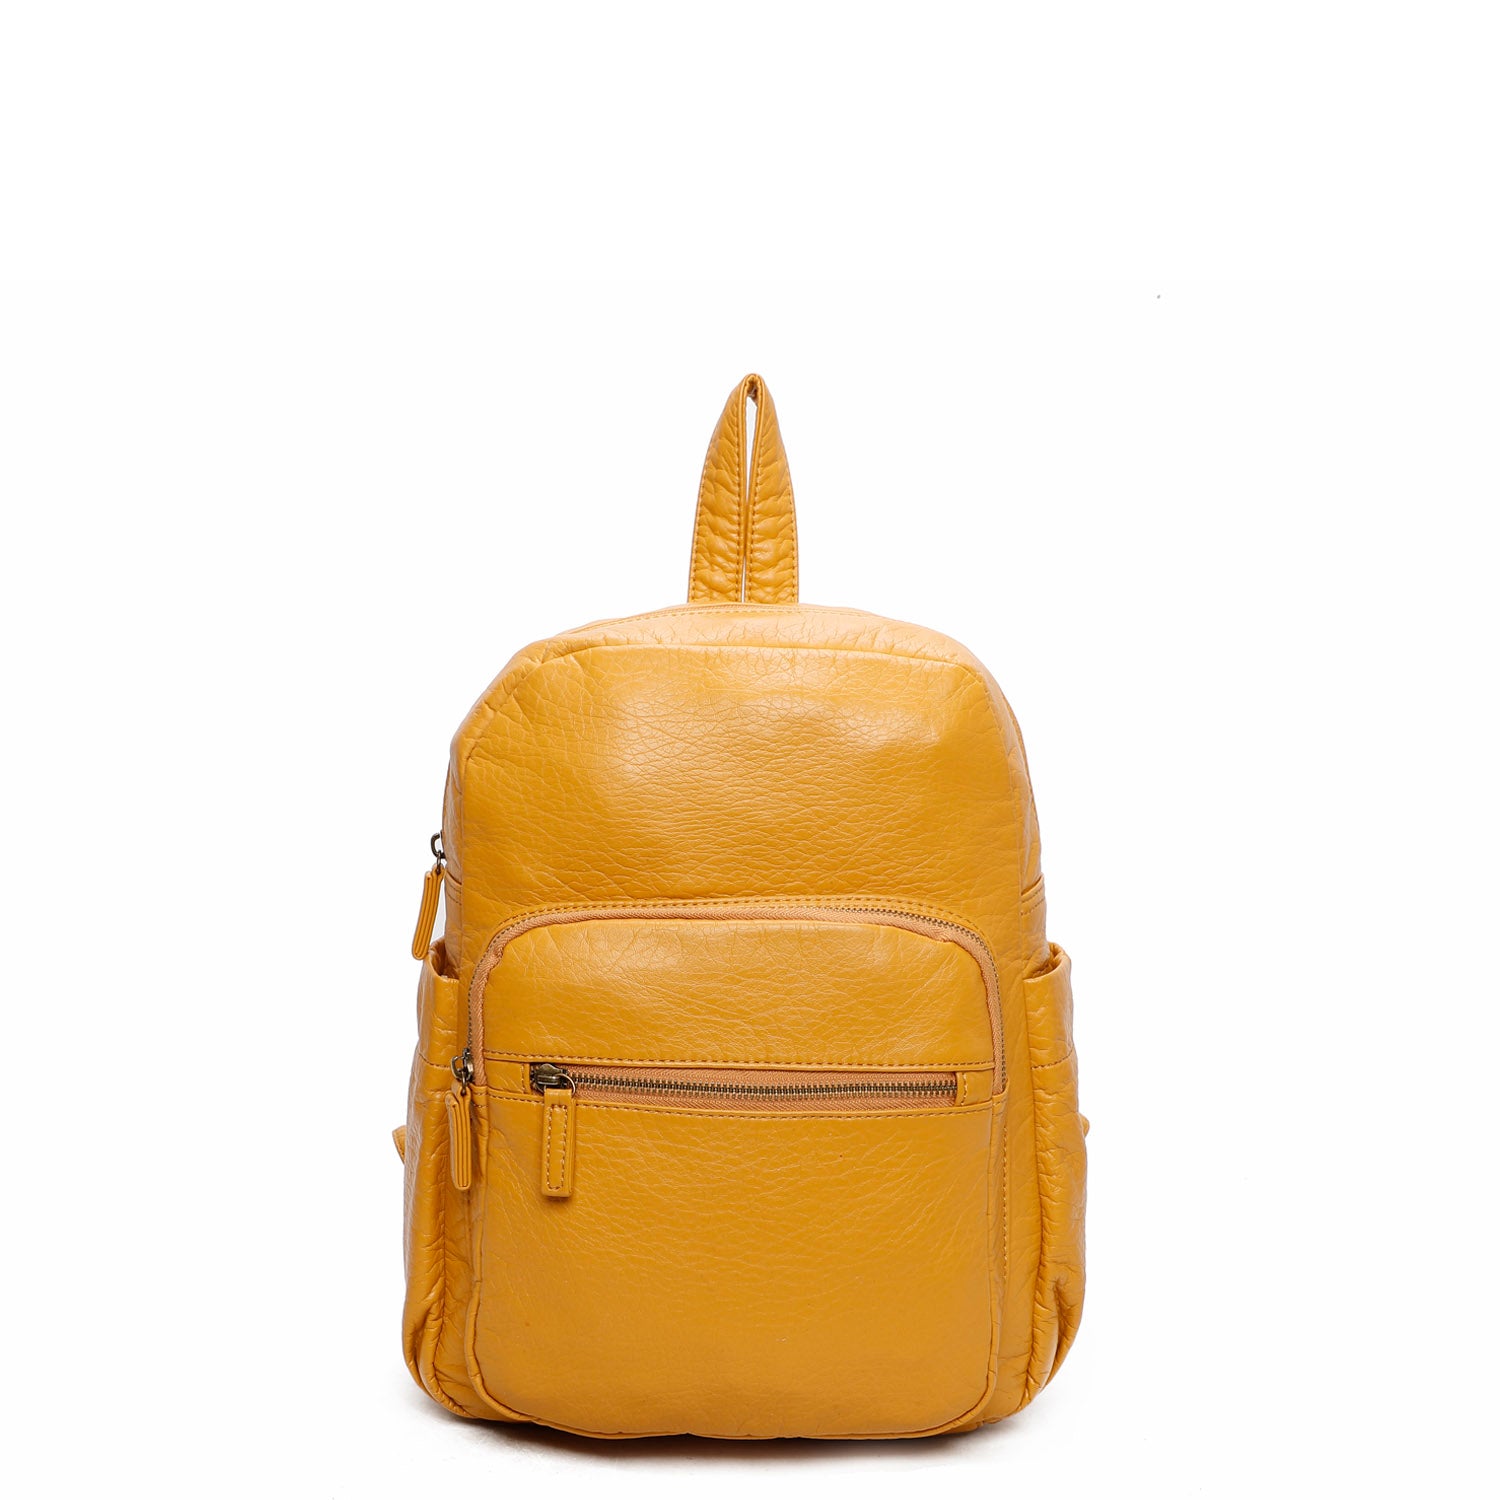 Amazon.com: LaGaksta Bria Convertible Leather Backpack Purse - Casual  Travel Shoulder Bag (Mustard Yellow) : Clothing, Shoes & Jewelry